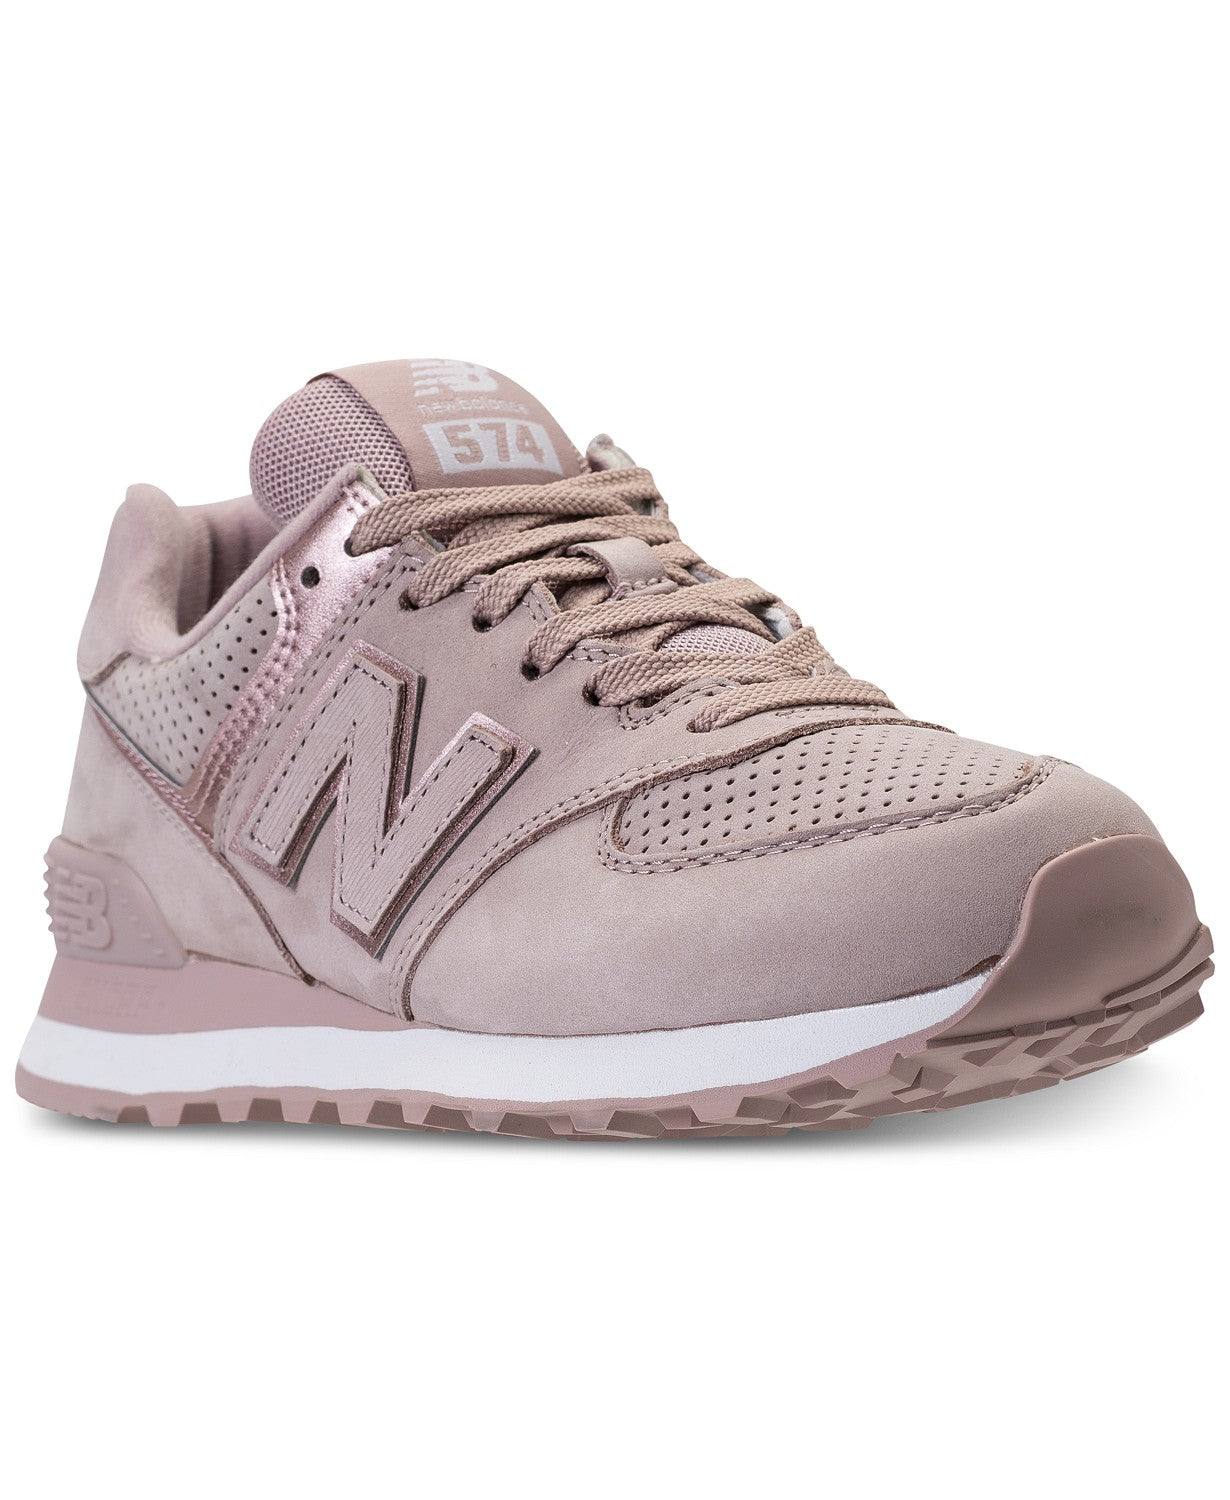 new balance womens shoes rose gold